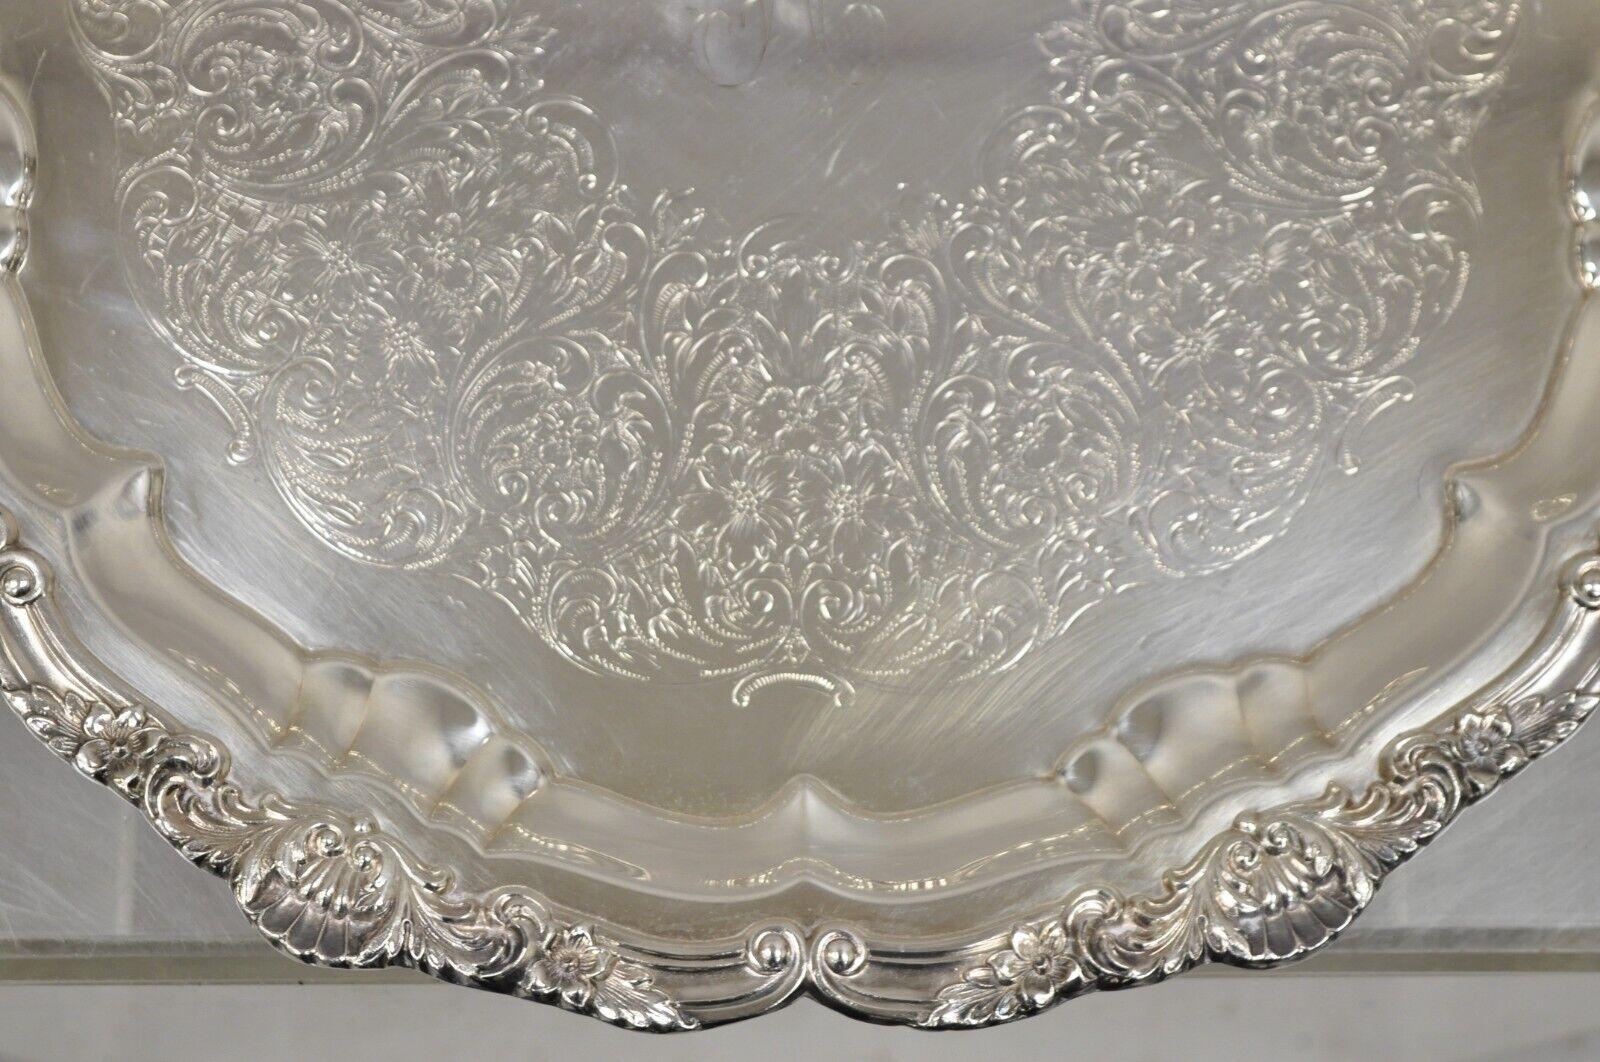 Vintage EPCA Silverplate by Poole 3216 Round Platter Tray - Engraved In Good Condition For Sale In Philadelphia, PA